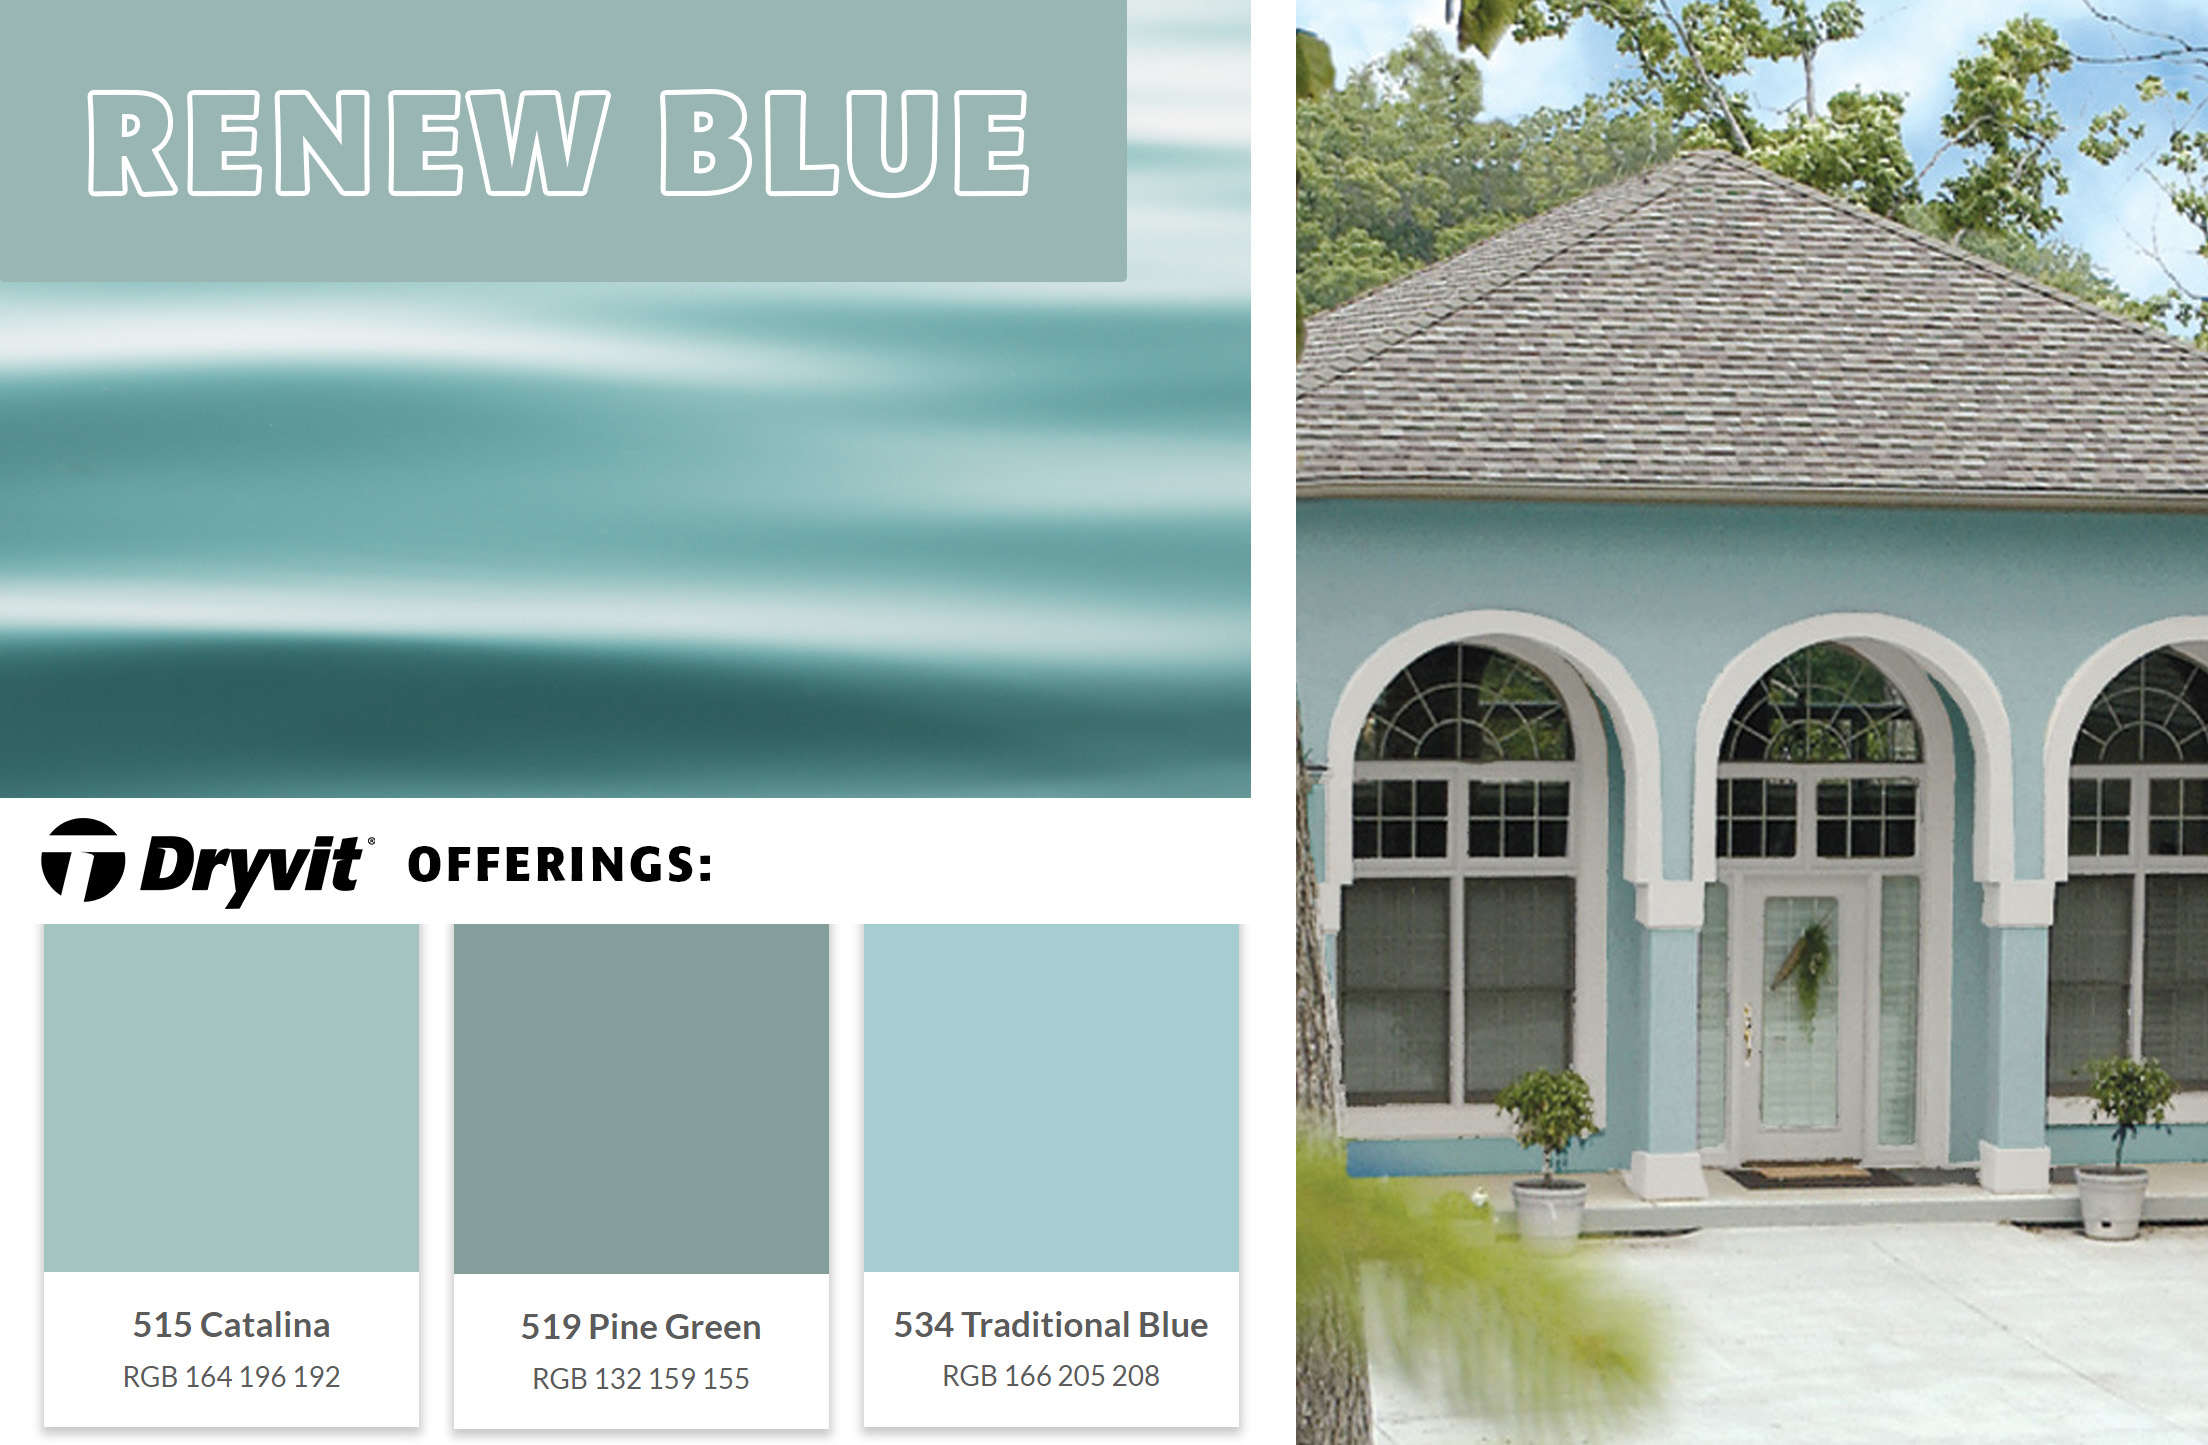 a collage of images showing a tranquil, airy light blue color. Images include an ocean and an EIFS Building façade in this blue color. 